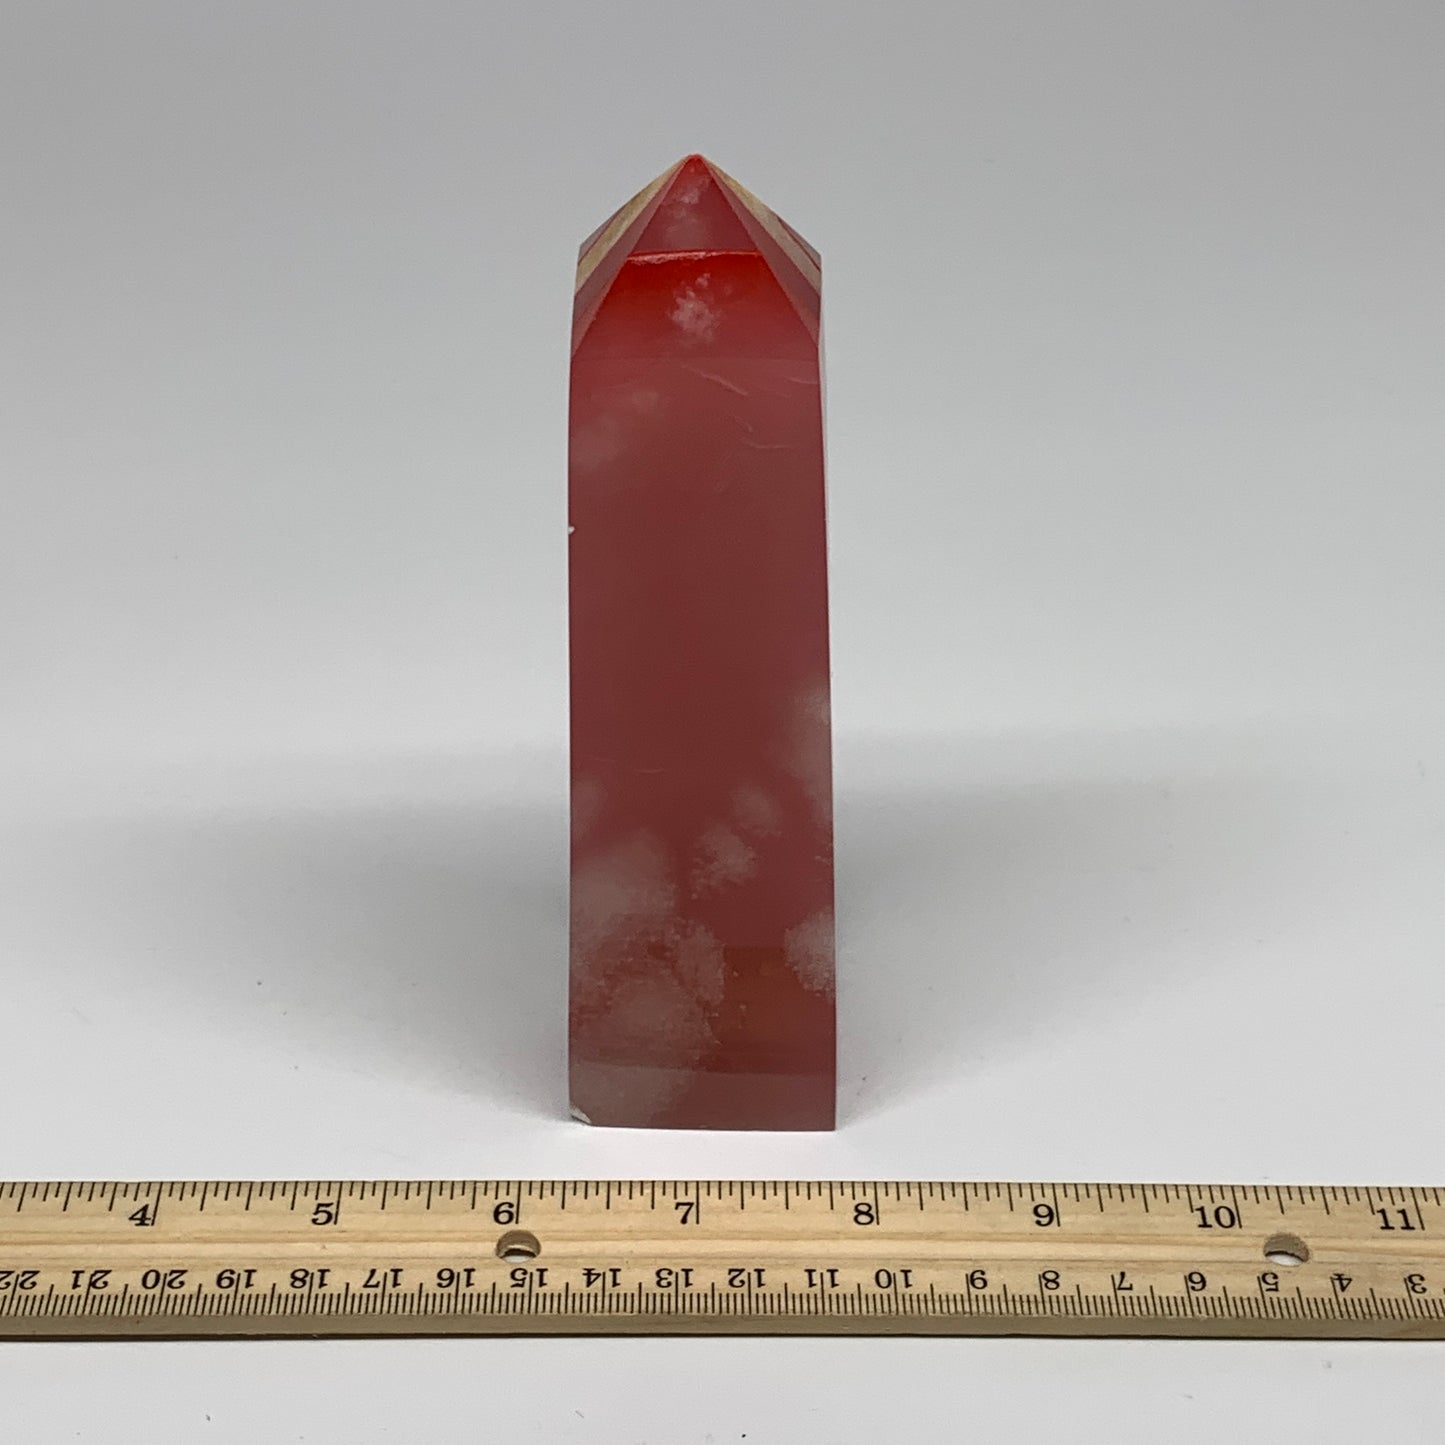 486.3g, 5.8"x1.6"x1.7" Dyed/Heated Calcite Point Tower Obelisk Crystal, B24987